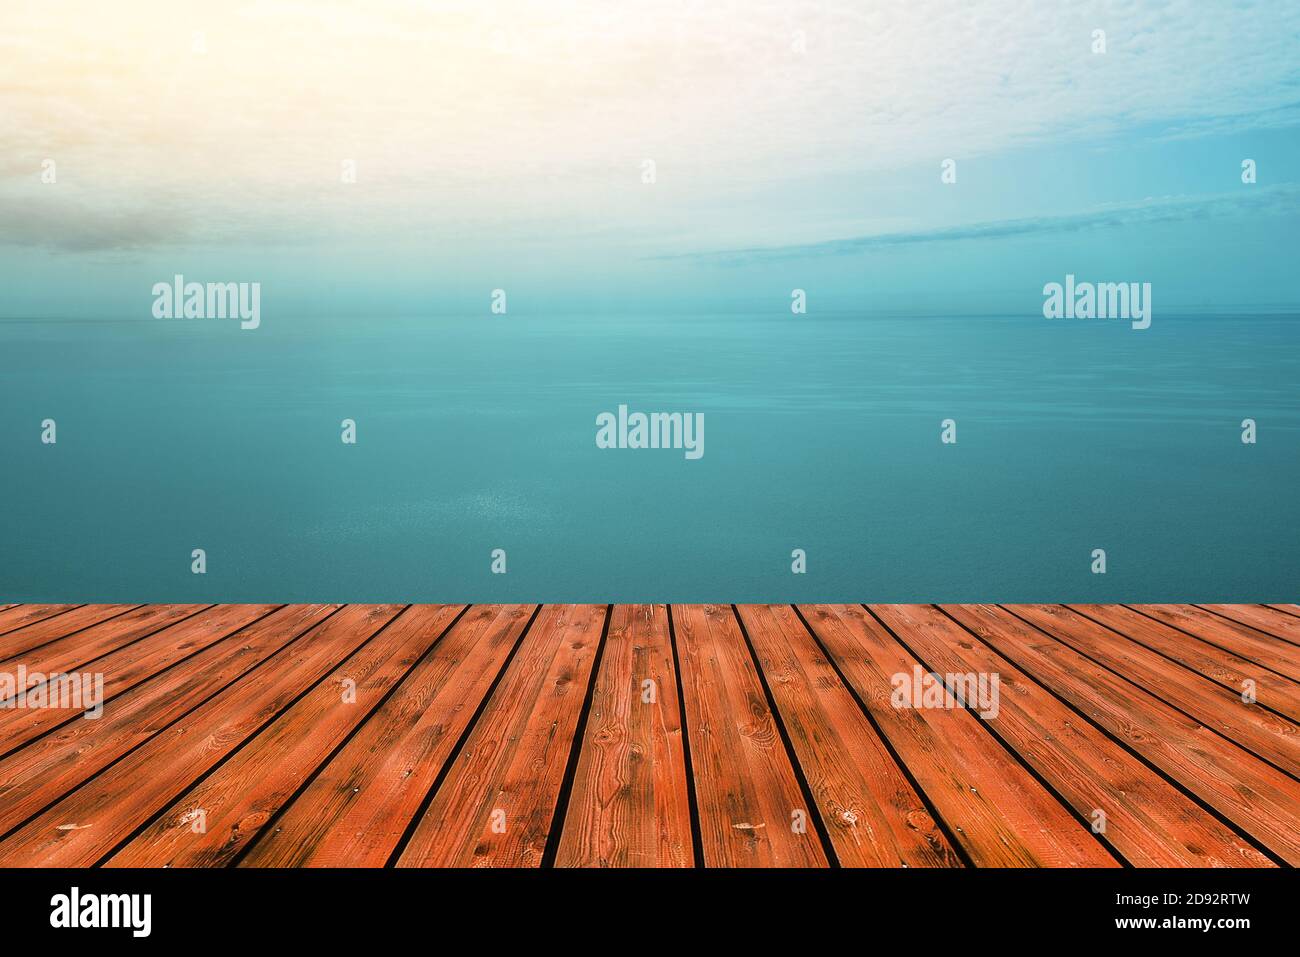 Wooden table top and sea or ocean views with turquoise skies. Display concept of festive background or advertising products. Empty wood table top. Sum Stock Photo